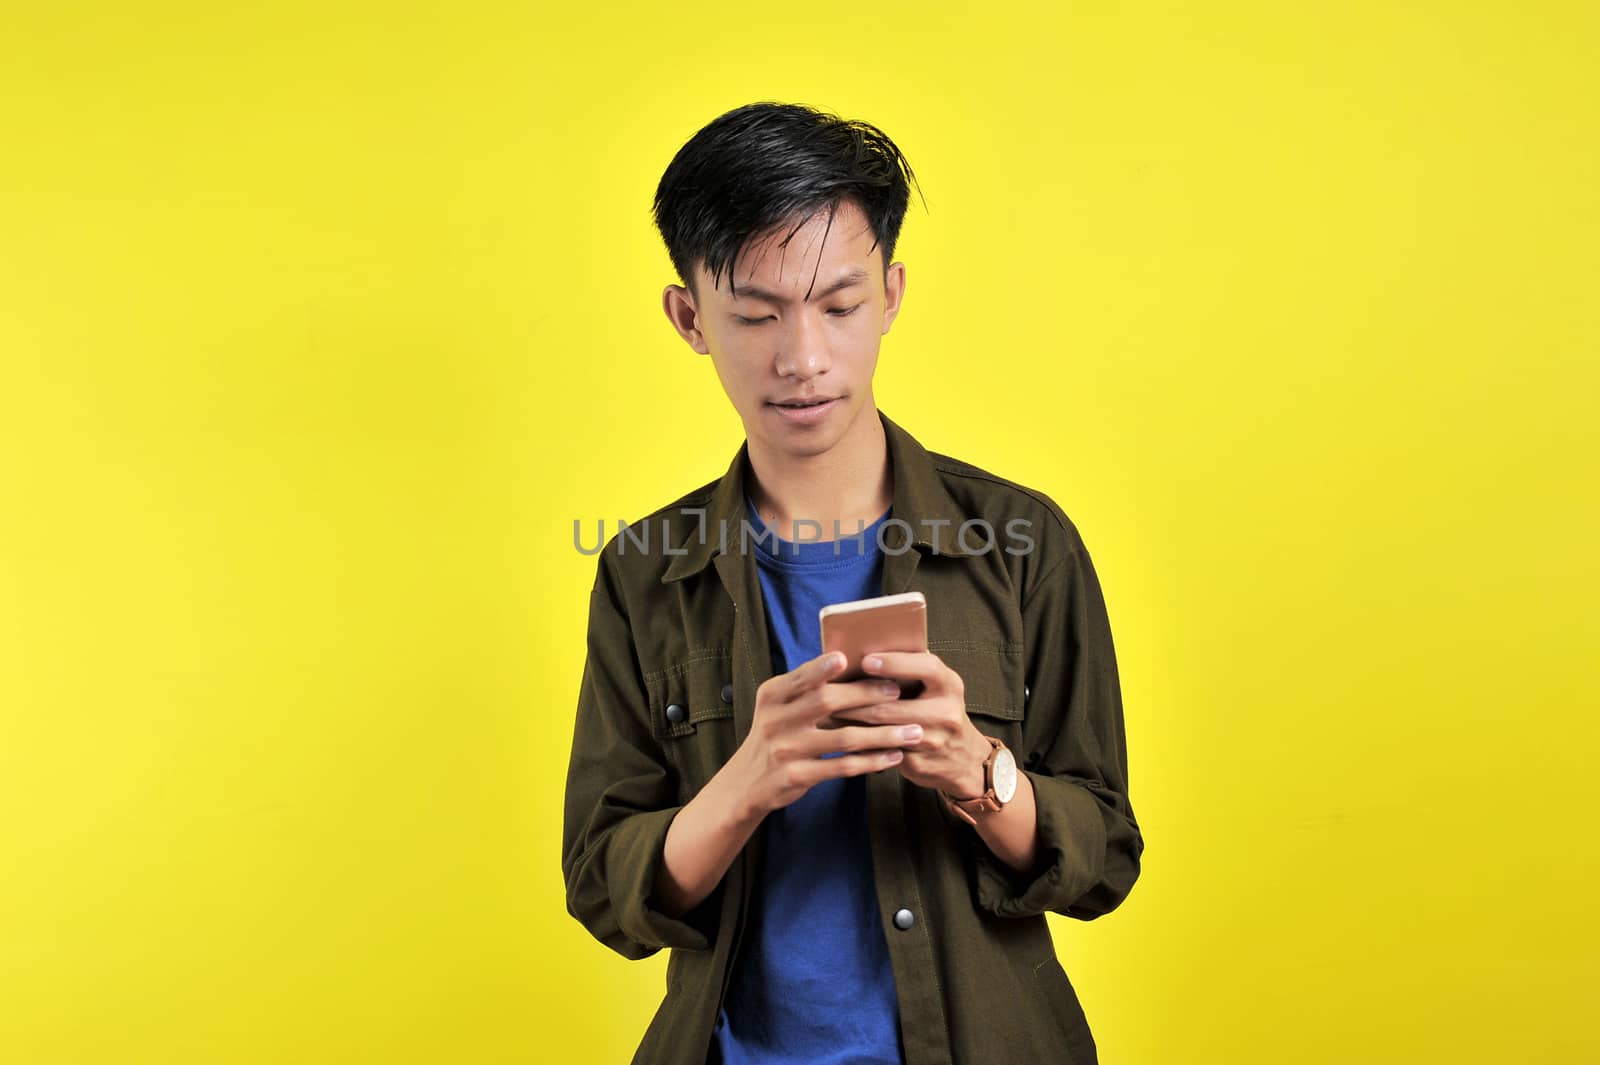 Shocked face of Asian man in white shirt looking at phone screen, isolated on yellow background.